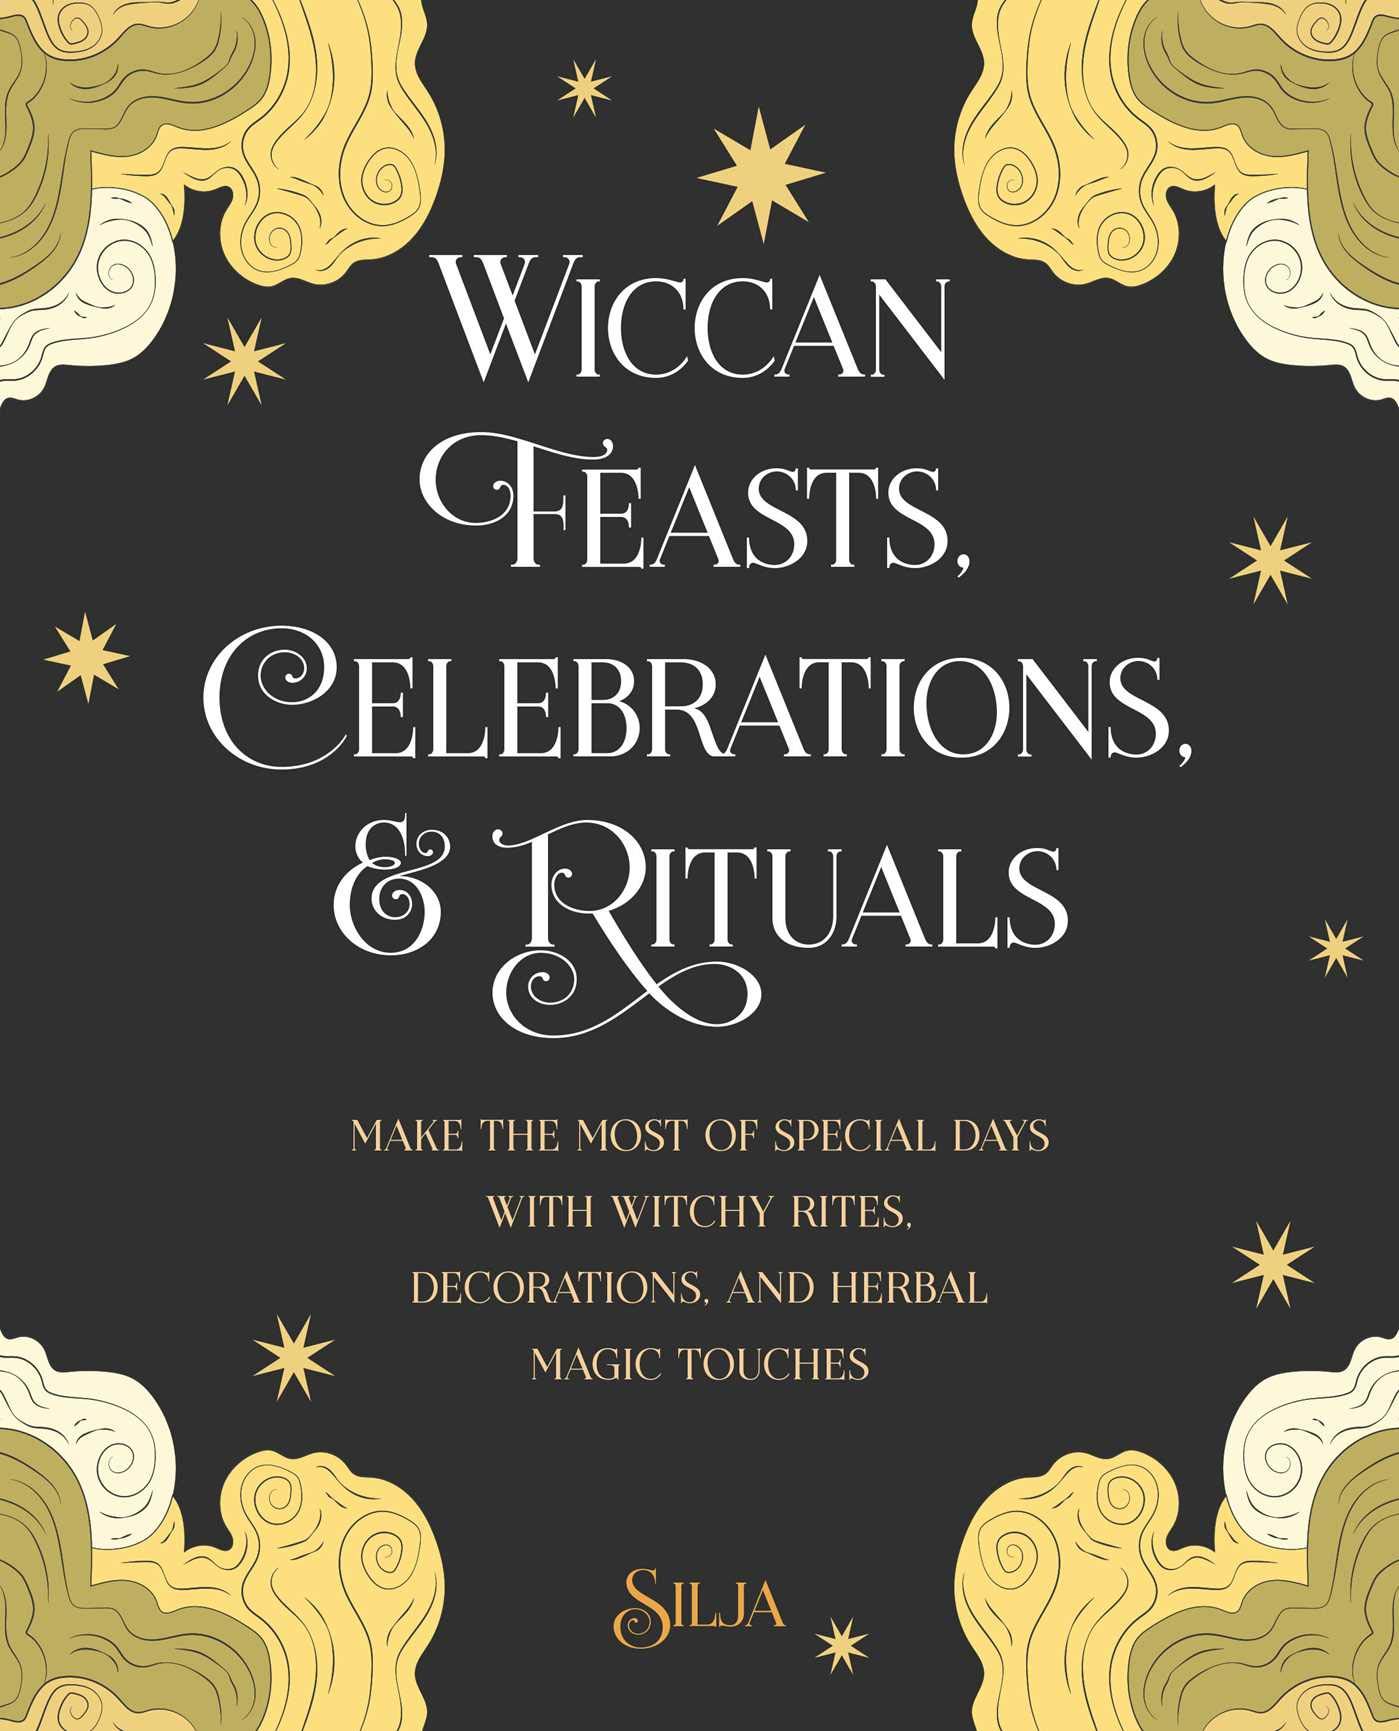 Wiccan Feasts, Celebrations, and Rituals | Silja